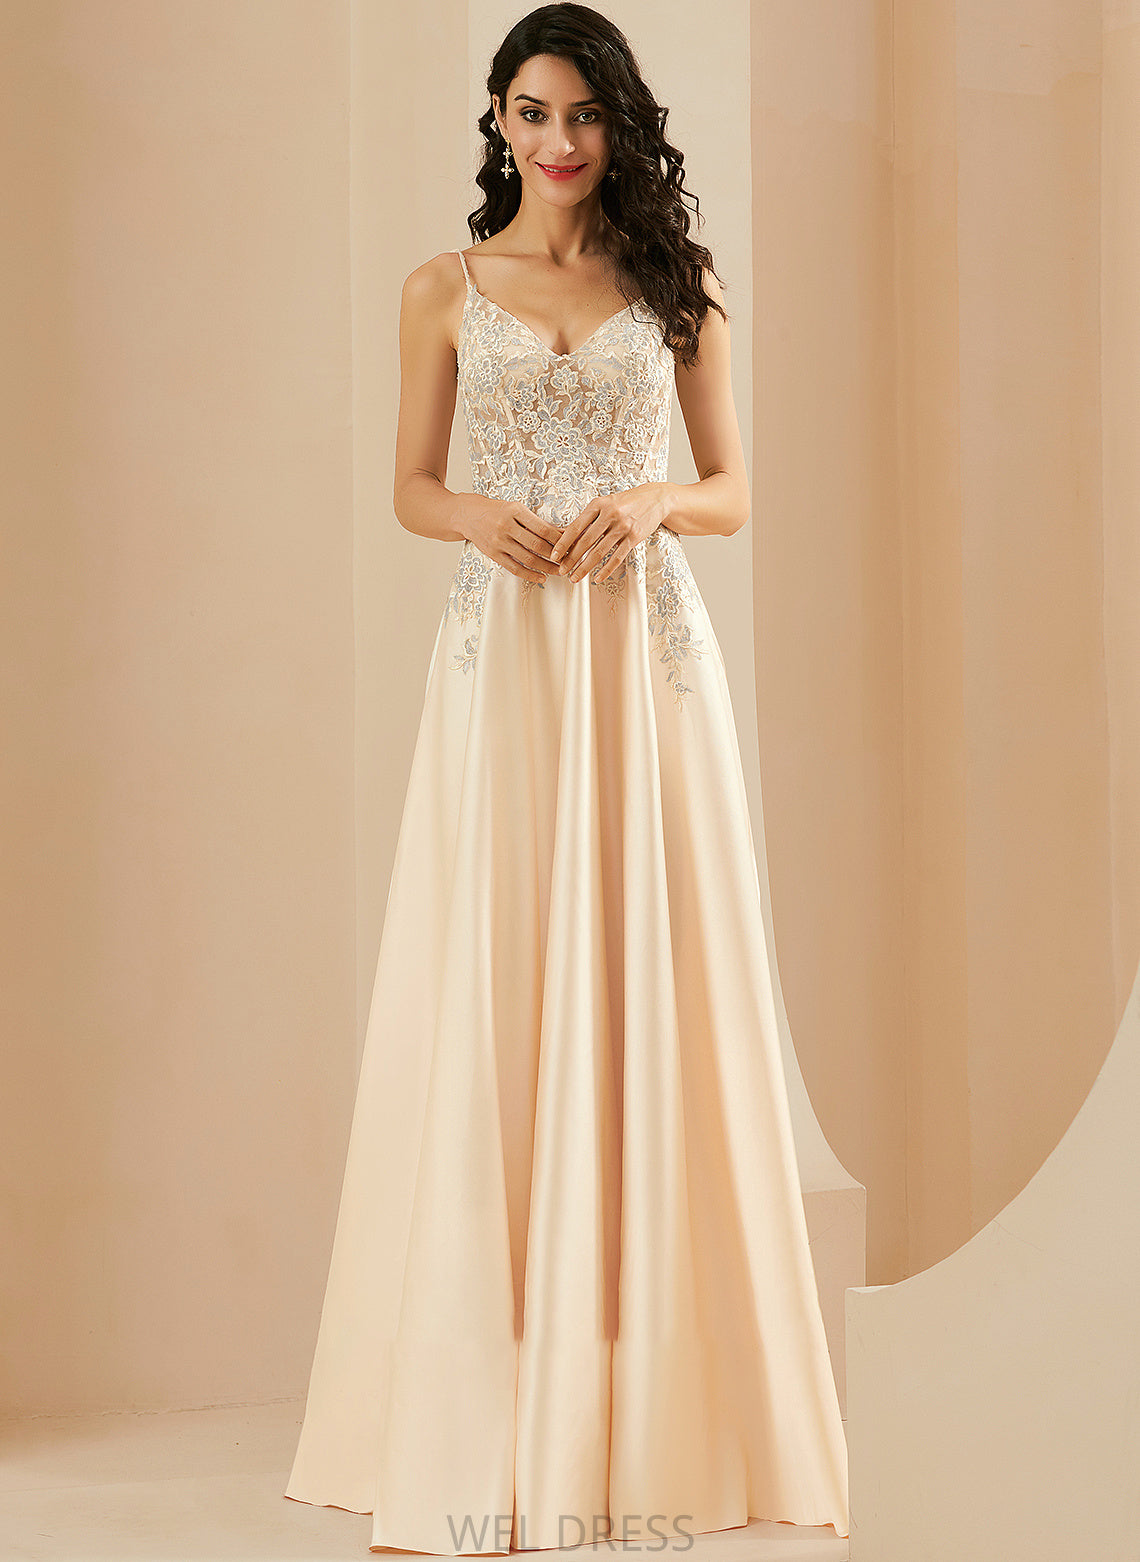 With Floor-Length A-Line Prom Dresses V-neck Lace Satin Madalynn